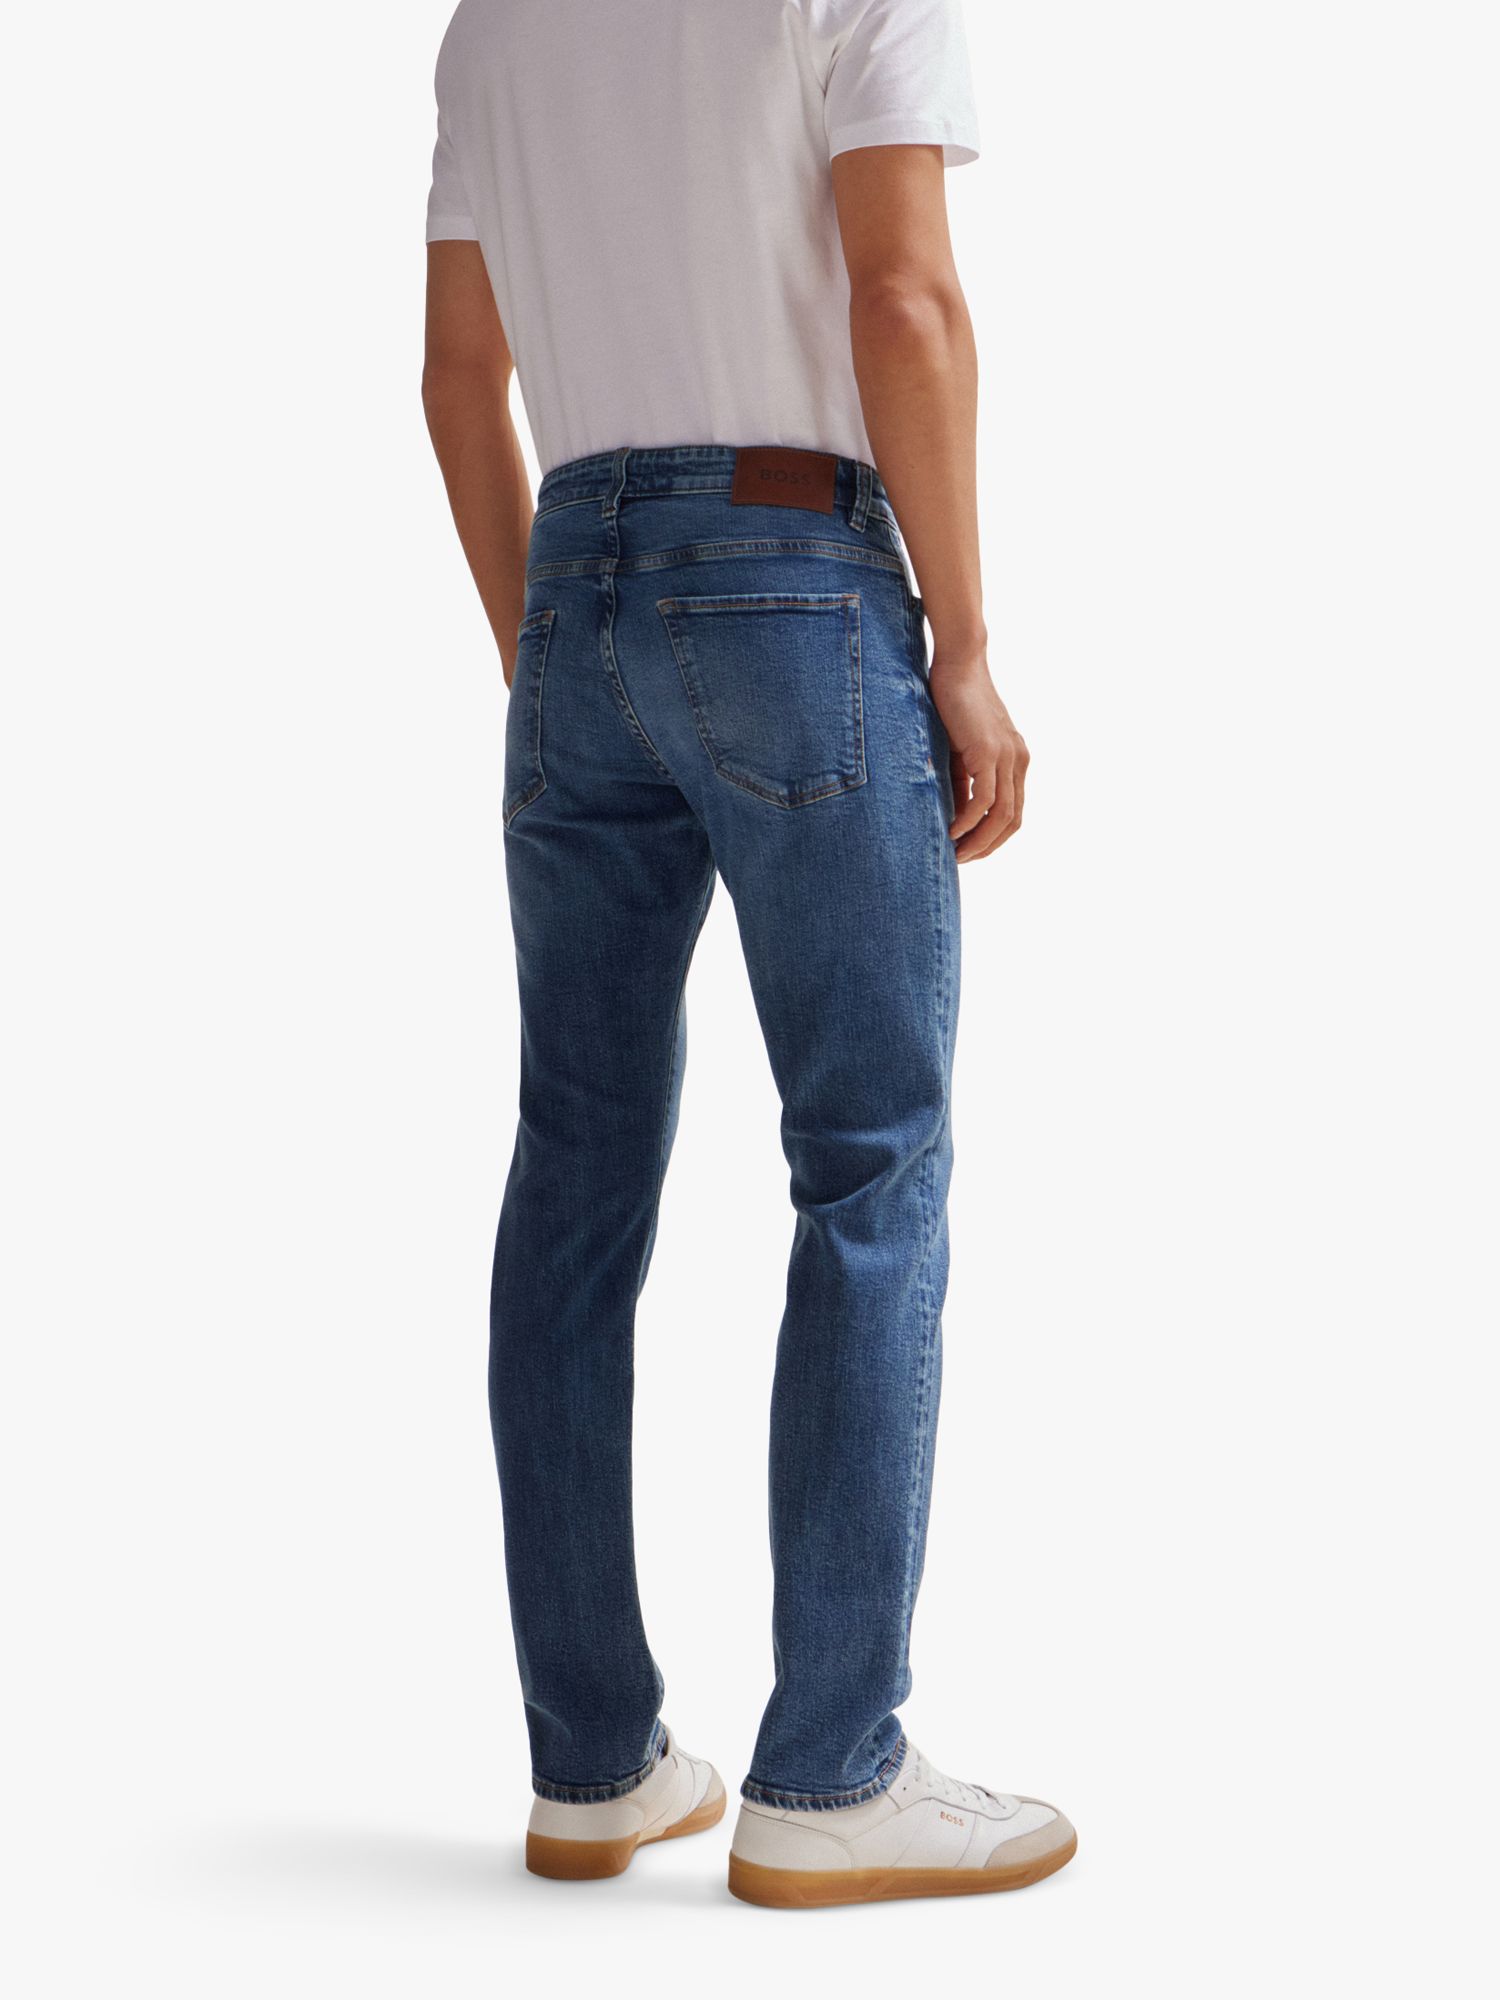 BOSS Delware Slim Fit Jeans, Blue, 33S